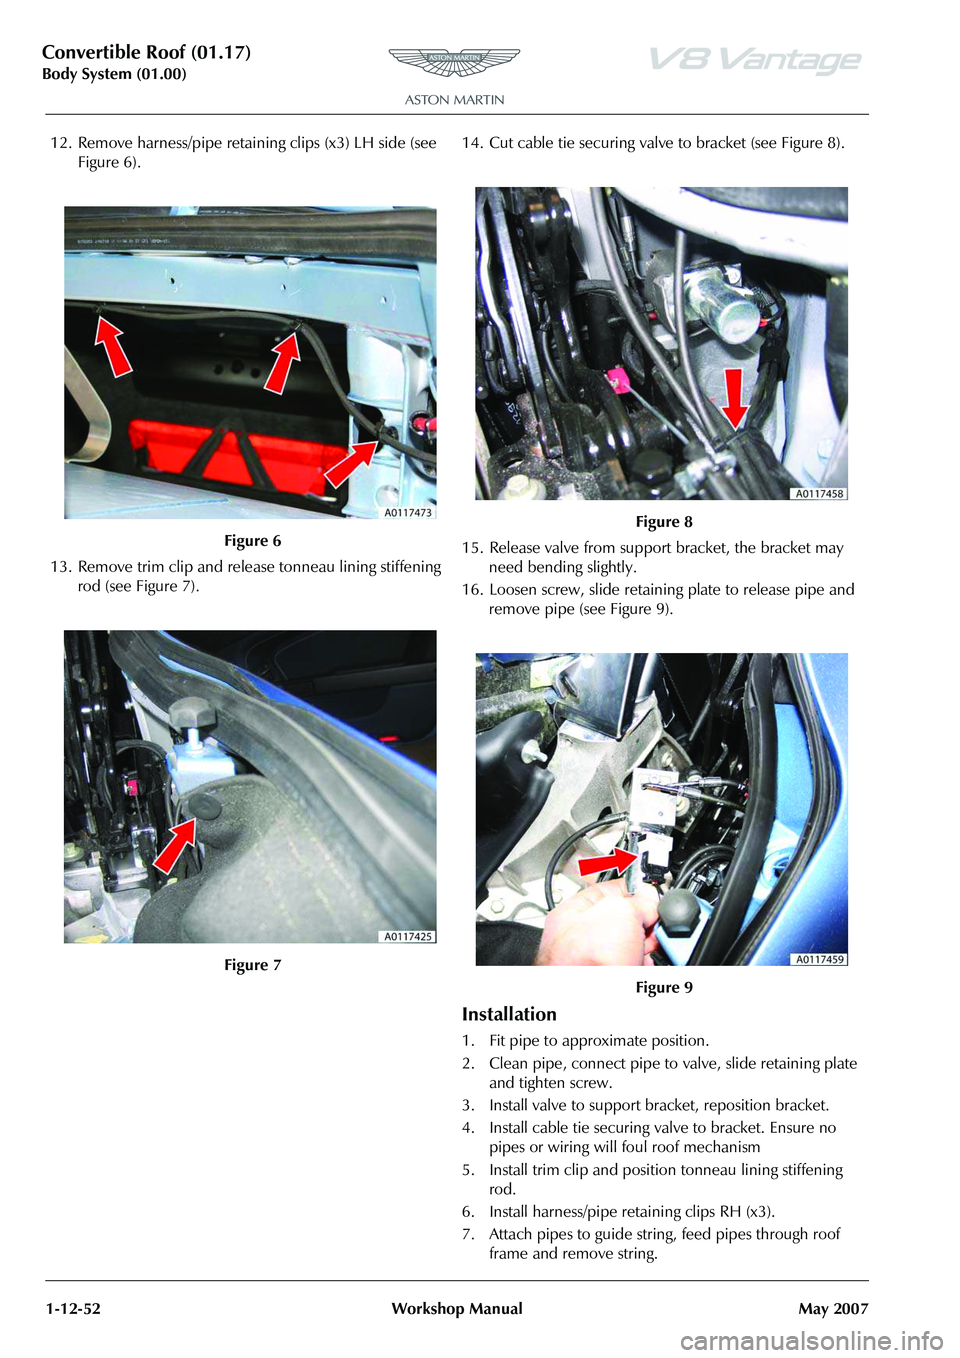 ASTON MARTIN V8 VANTAGE 2010  Workshop Manual Convertible Roof (01.17)
Body System (01.00)1-12-52 Workshop Manual May 2007
12. Remove harness/pipe retaining clips (x3) LH side (see  Figure 6).
13. Remove trim clip and releas e tonneau lining stif